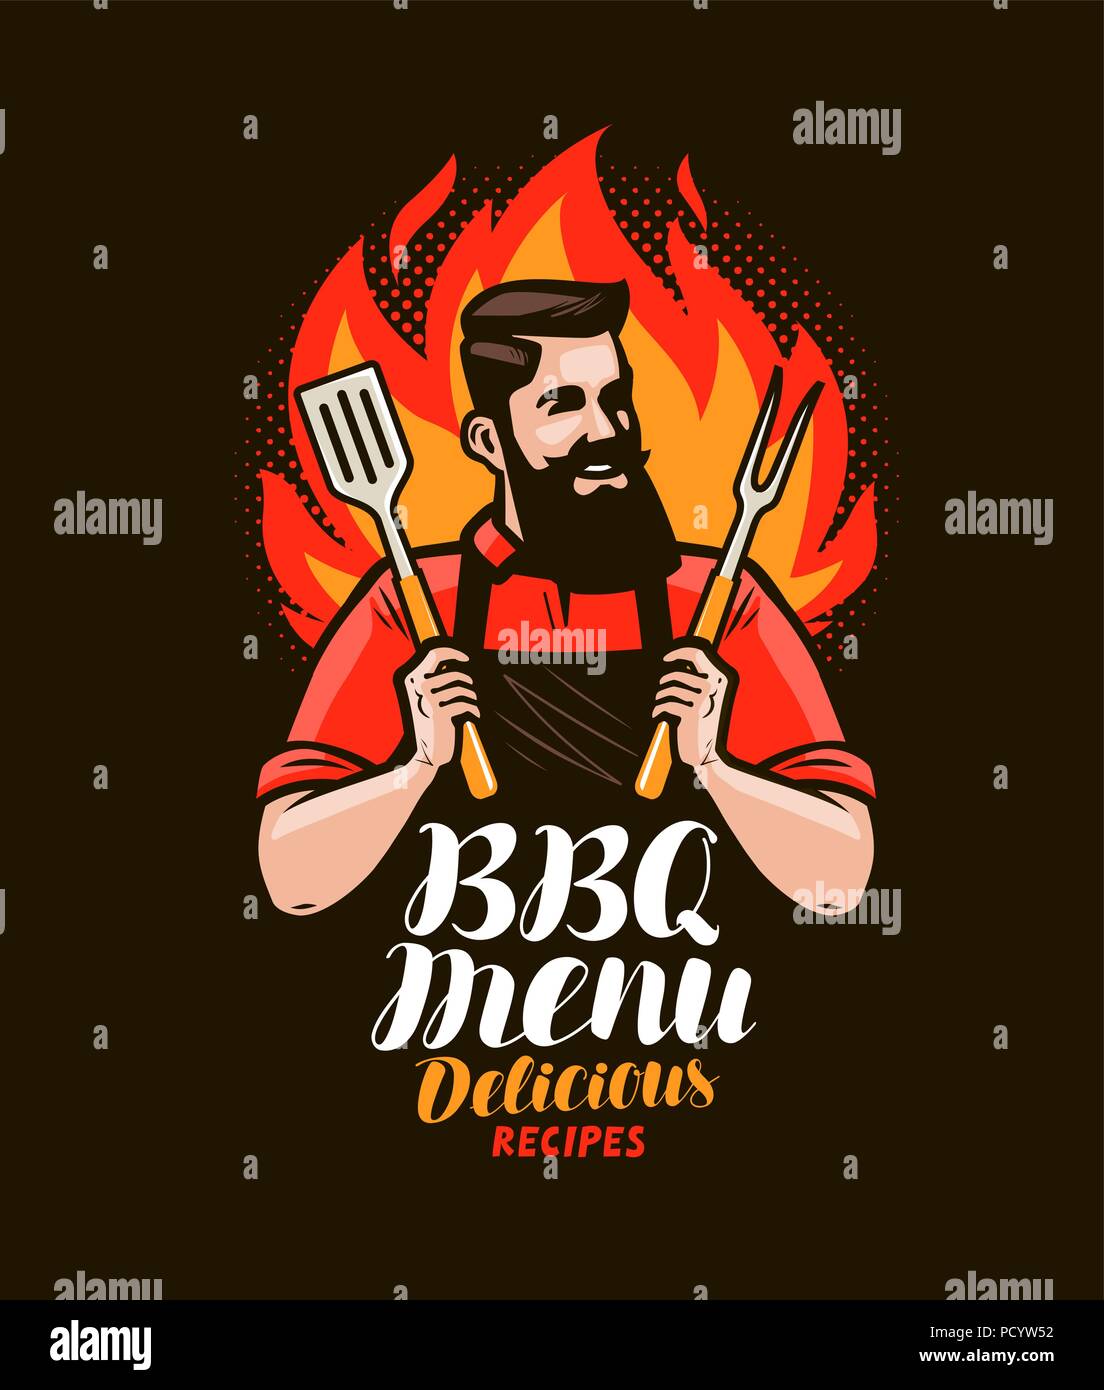 BBQ, barbecue. Design of menu for restaurant or cafe. Vector illustration Stock Vector